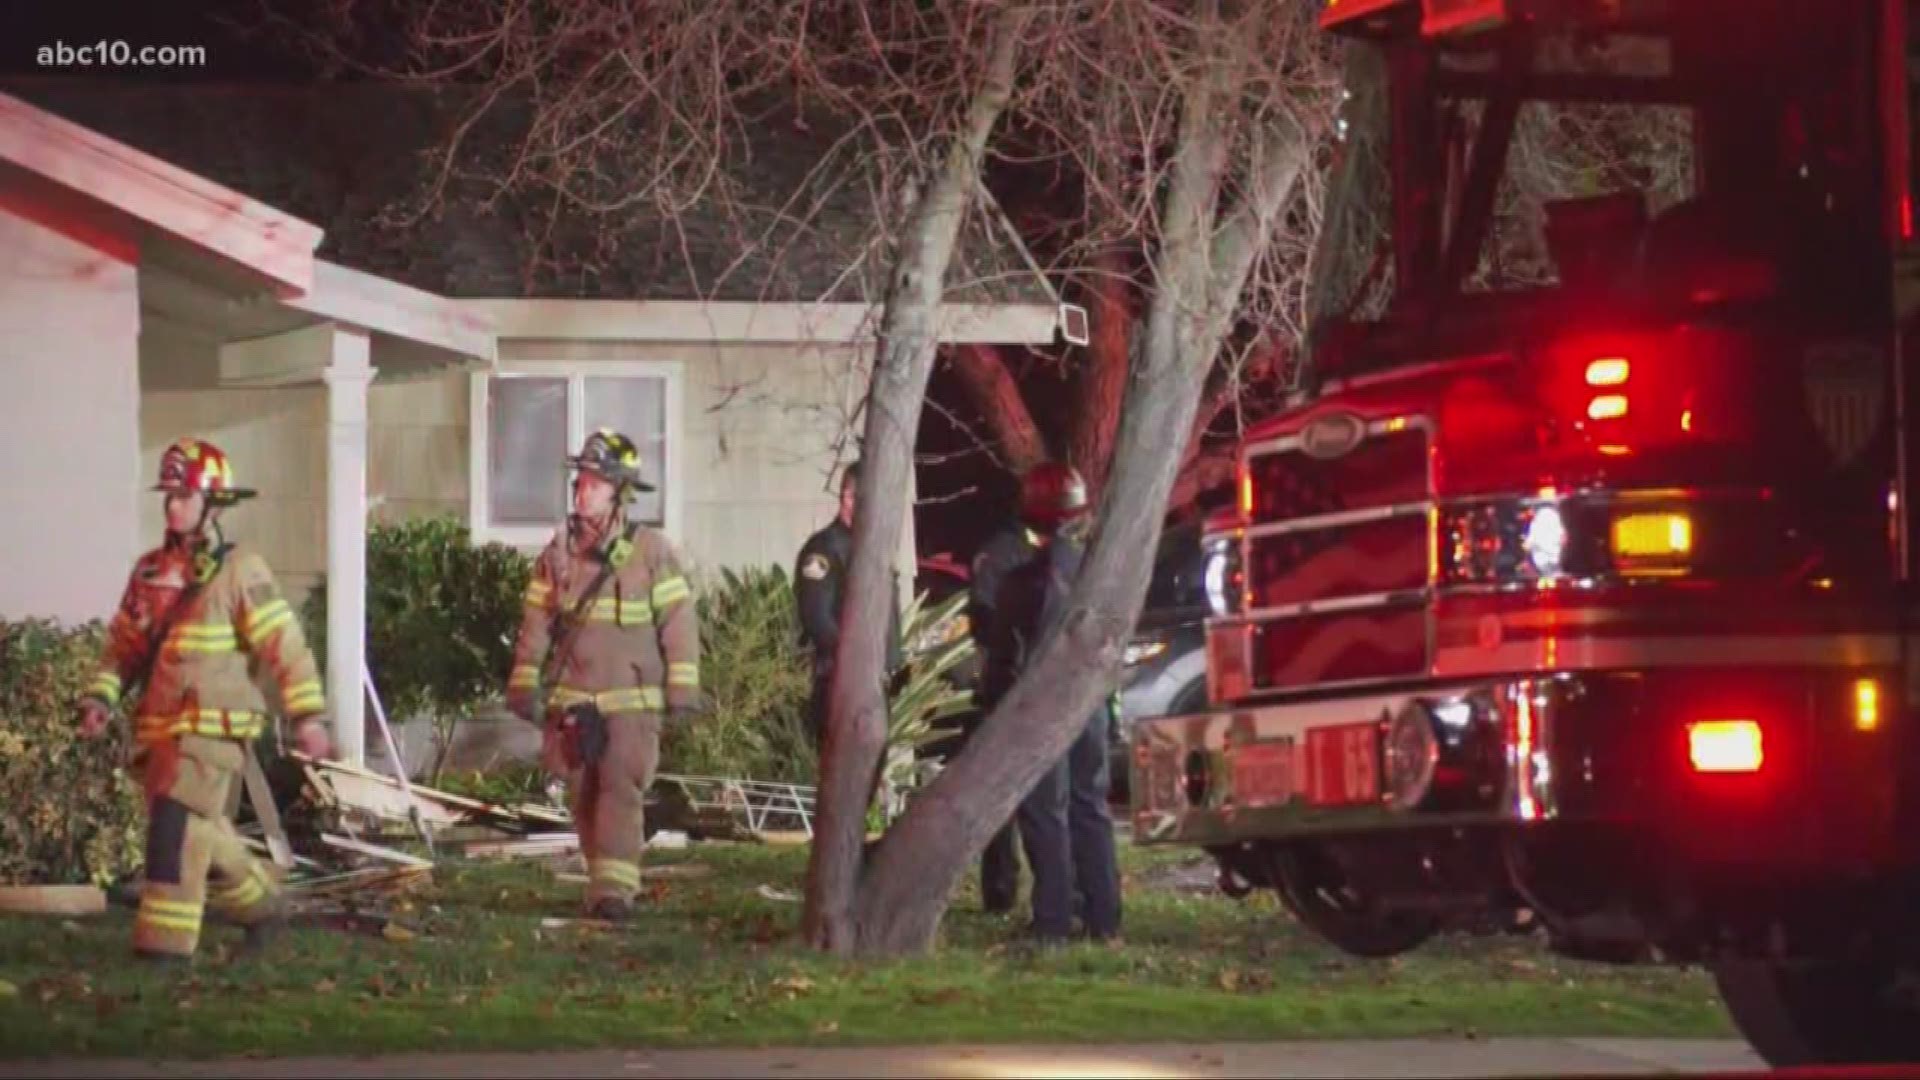 A neighbor told ABC10 that the people living in the home gathered family to watch the NFC championship game when the crash happened.